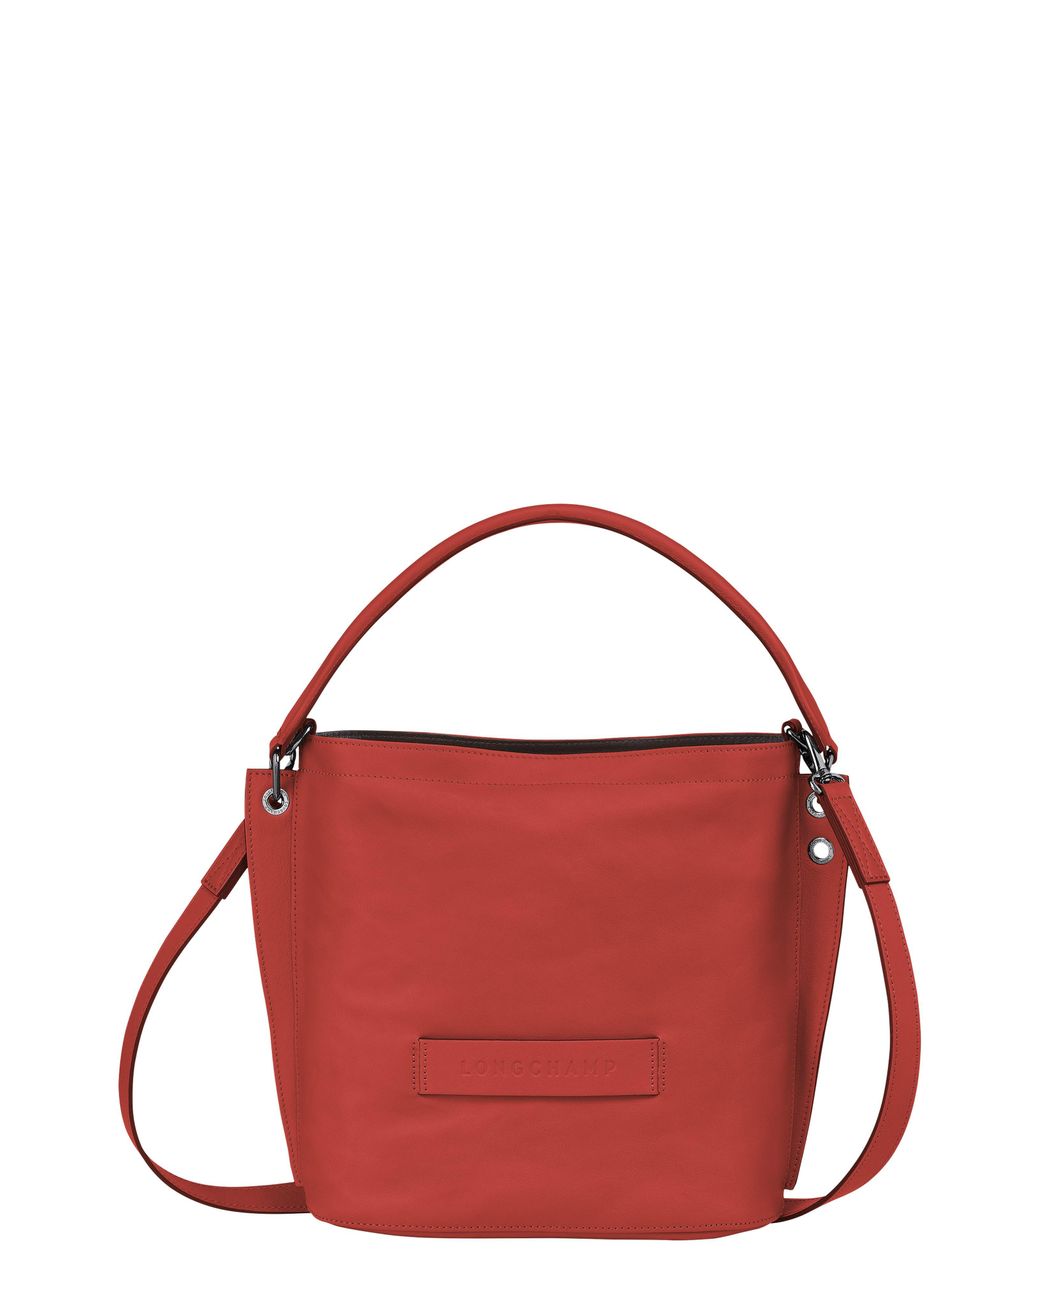 Longchamp Le Cuir Convertible Hobo Bag in Red